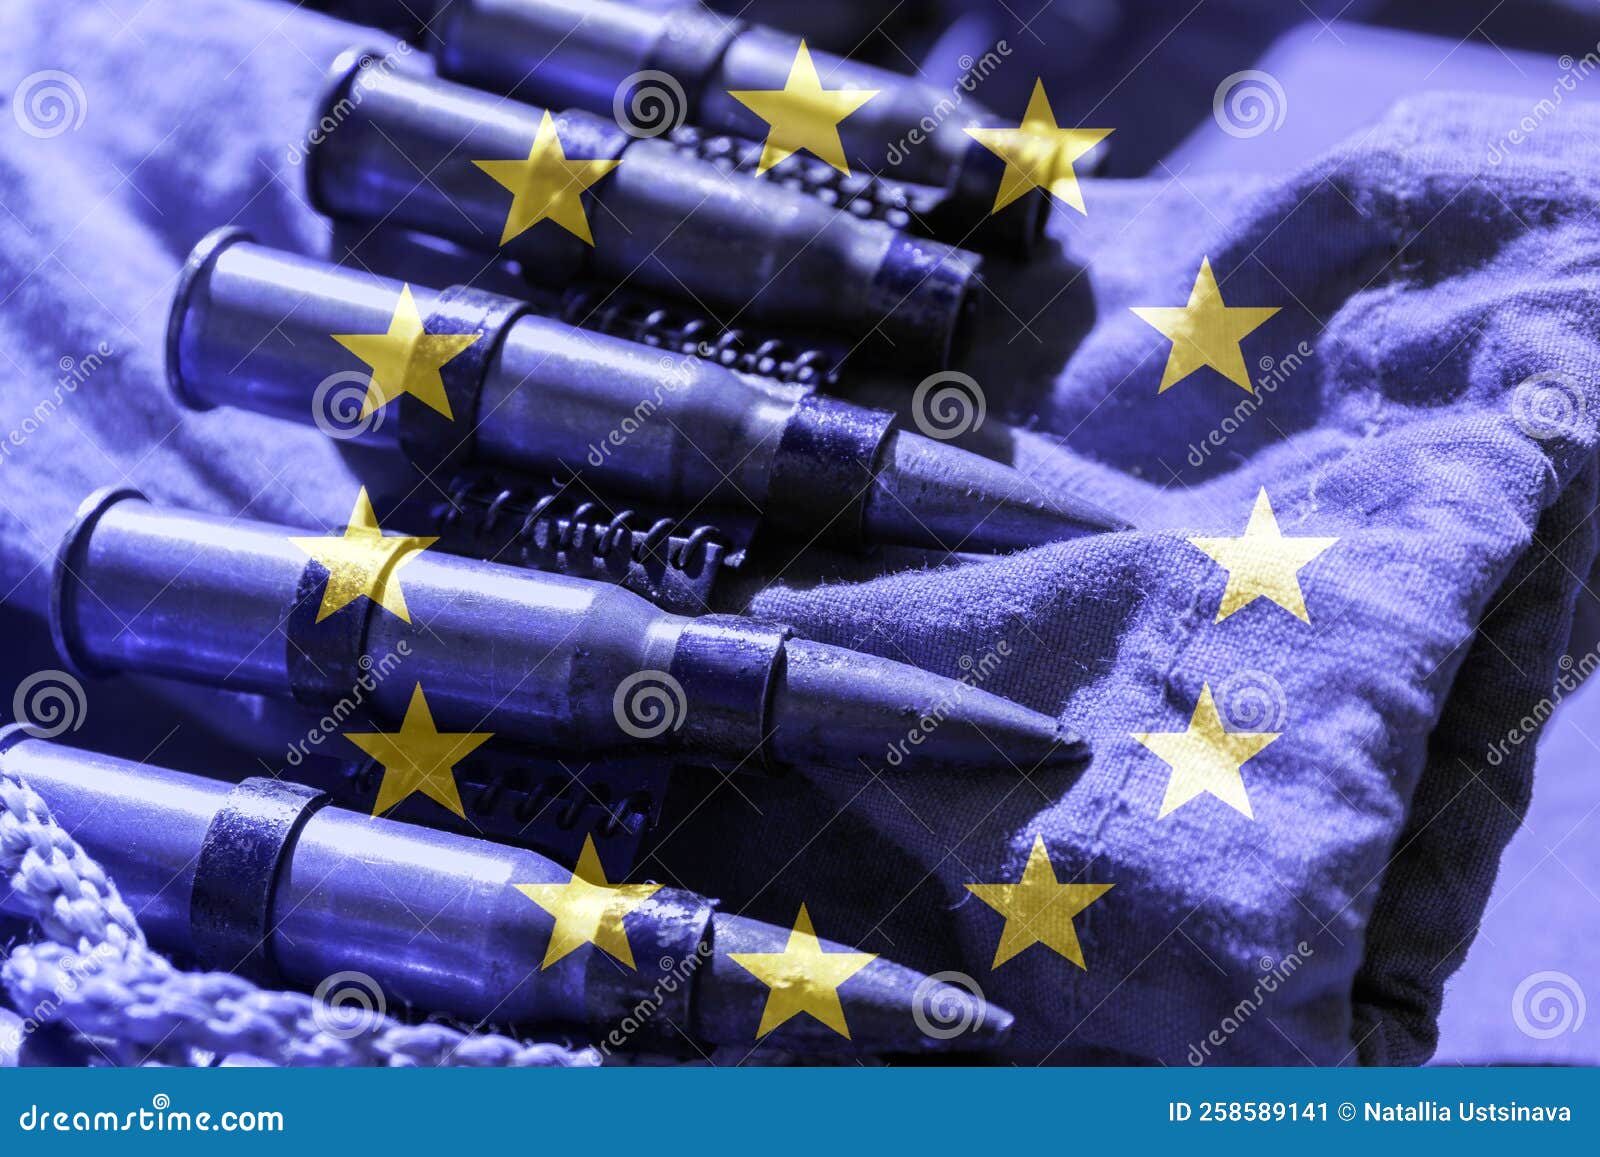 eu delivery of weapons and ammo to ukraine. military assistance of europe. europe ukraine war